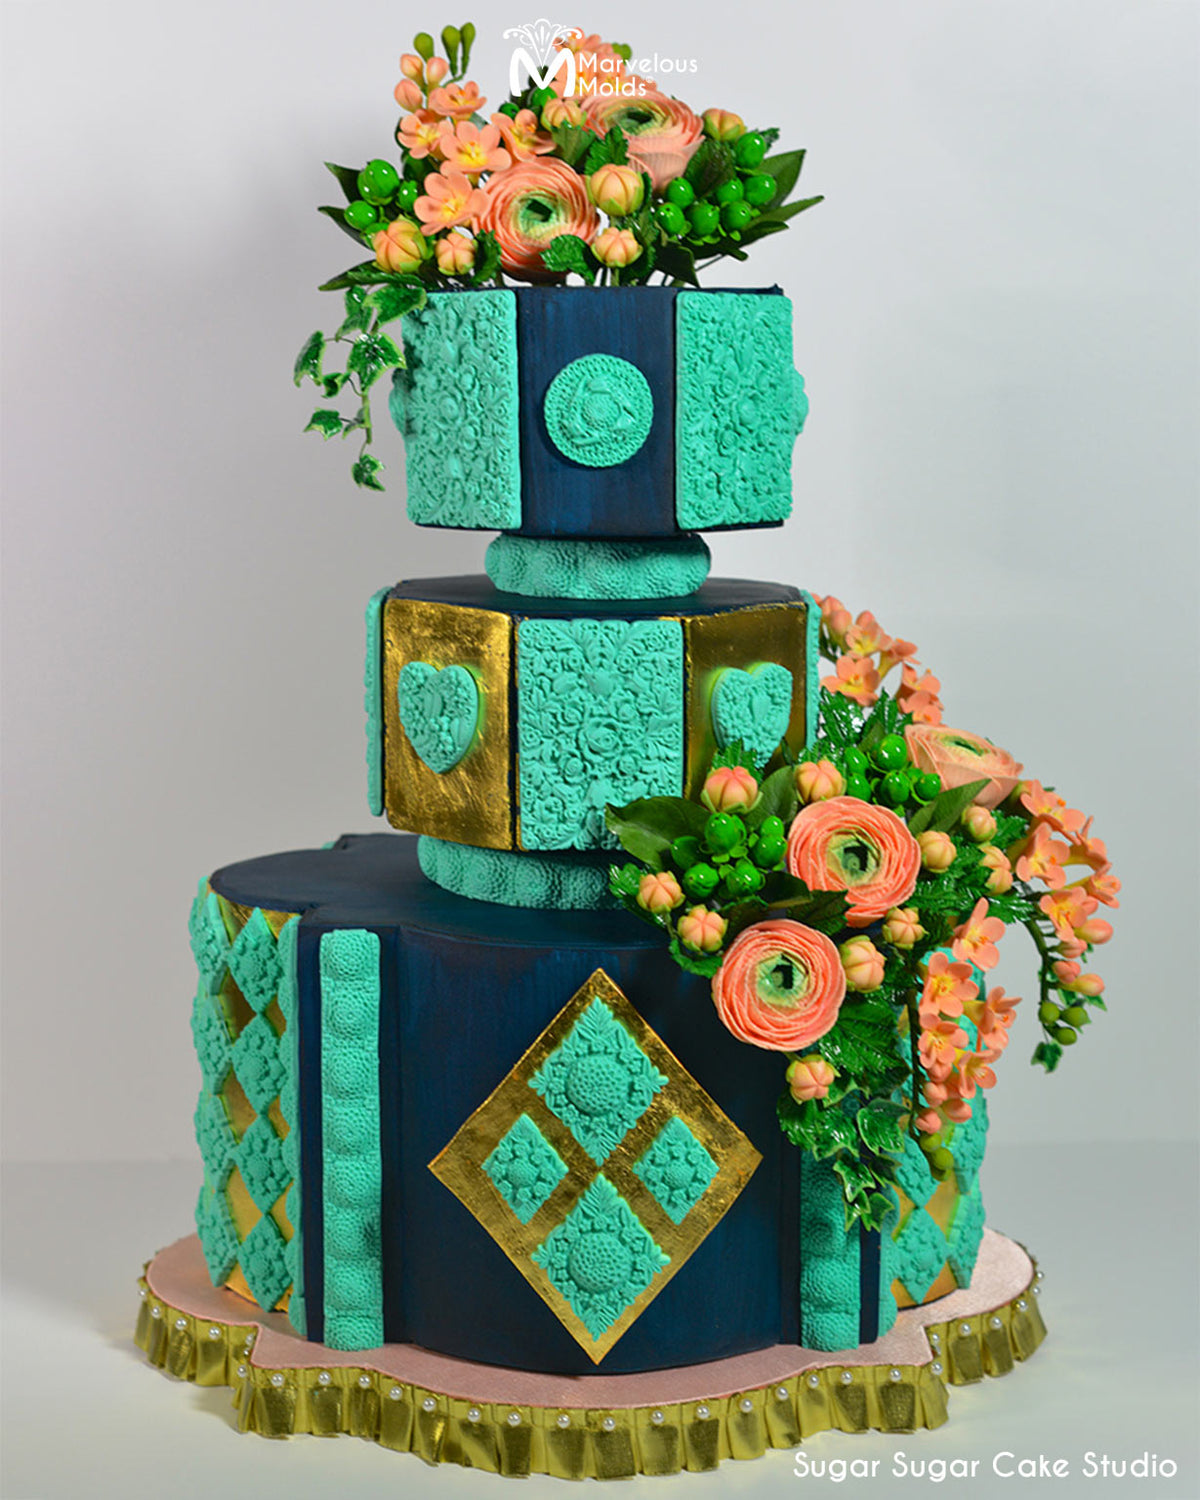 Turquoise and Navy Cake with Floral Embellishments, Decorated Using the Marvelous Molds Quadrille Border Silicone Mold for Cake Decorating